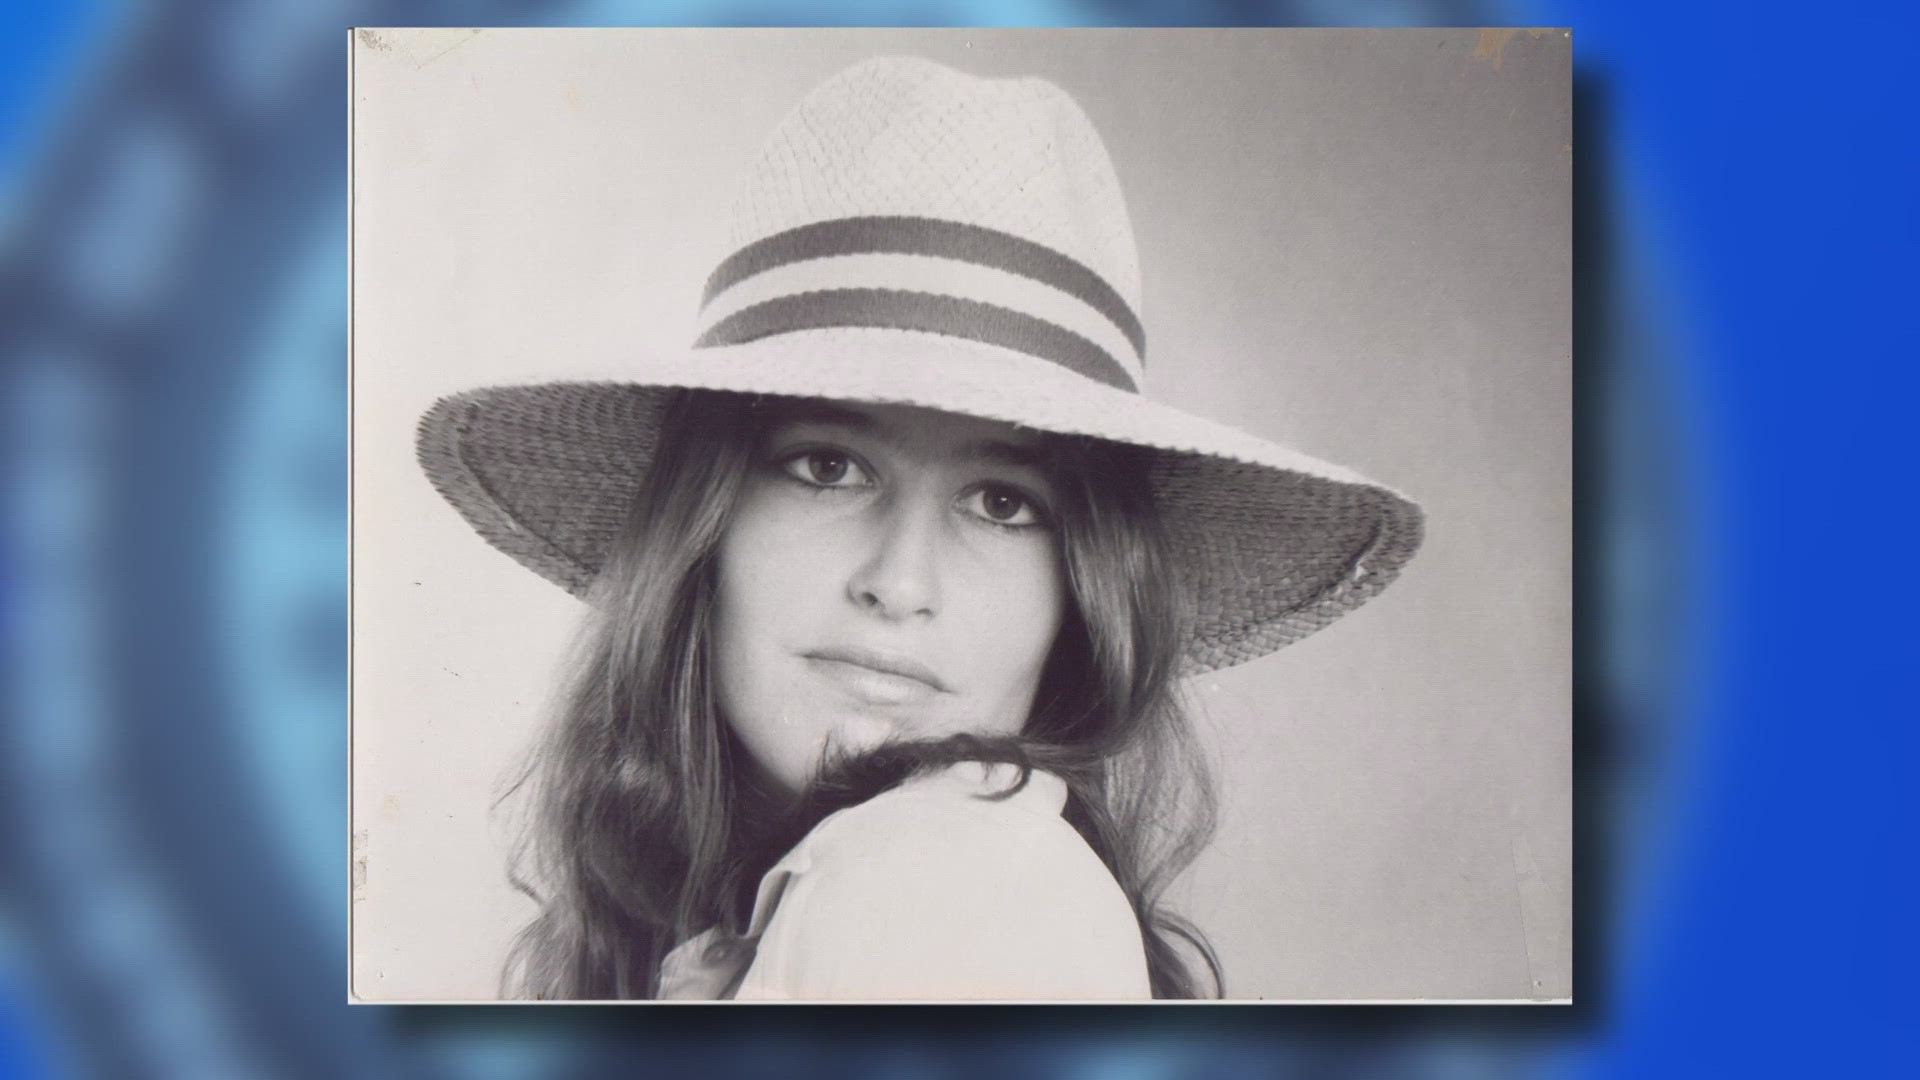 Law enforcement officials in New Hampshire say they’ve solved a killing that happened more than 40 years ago.